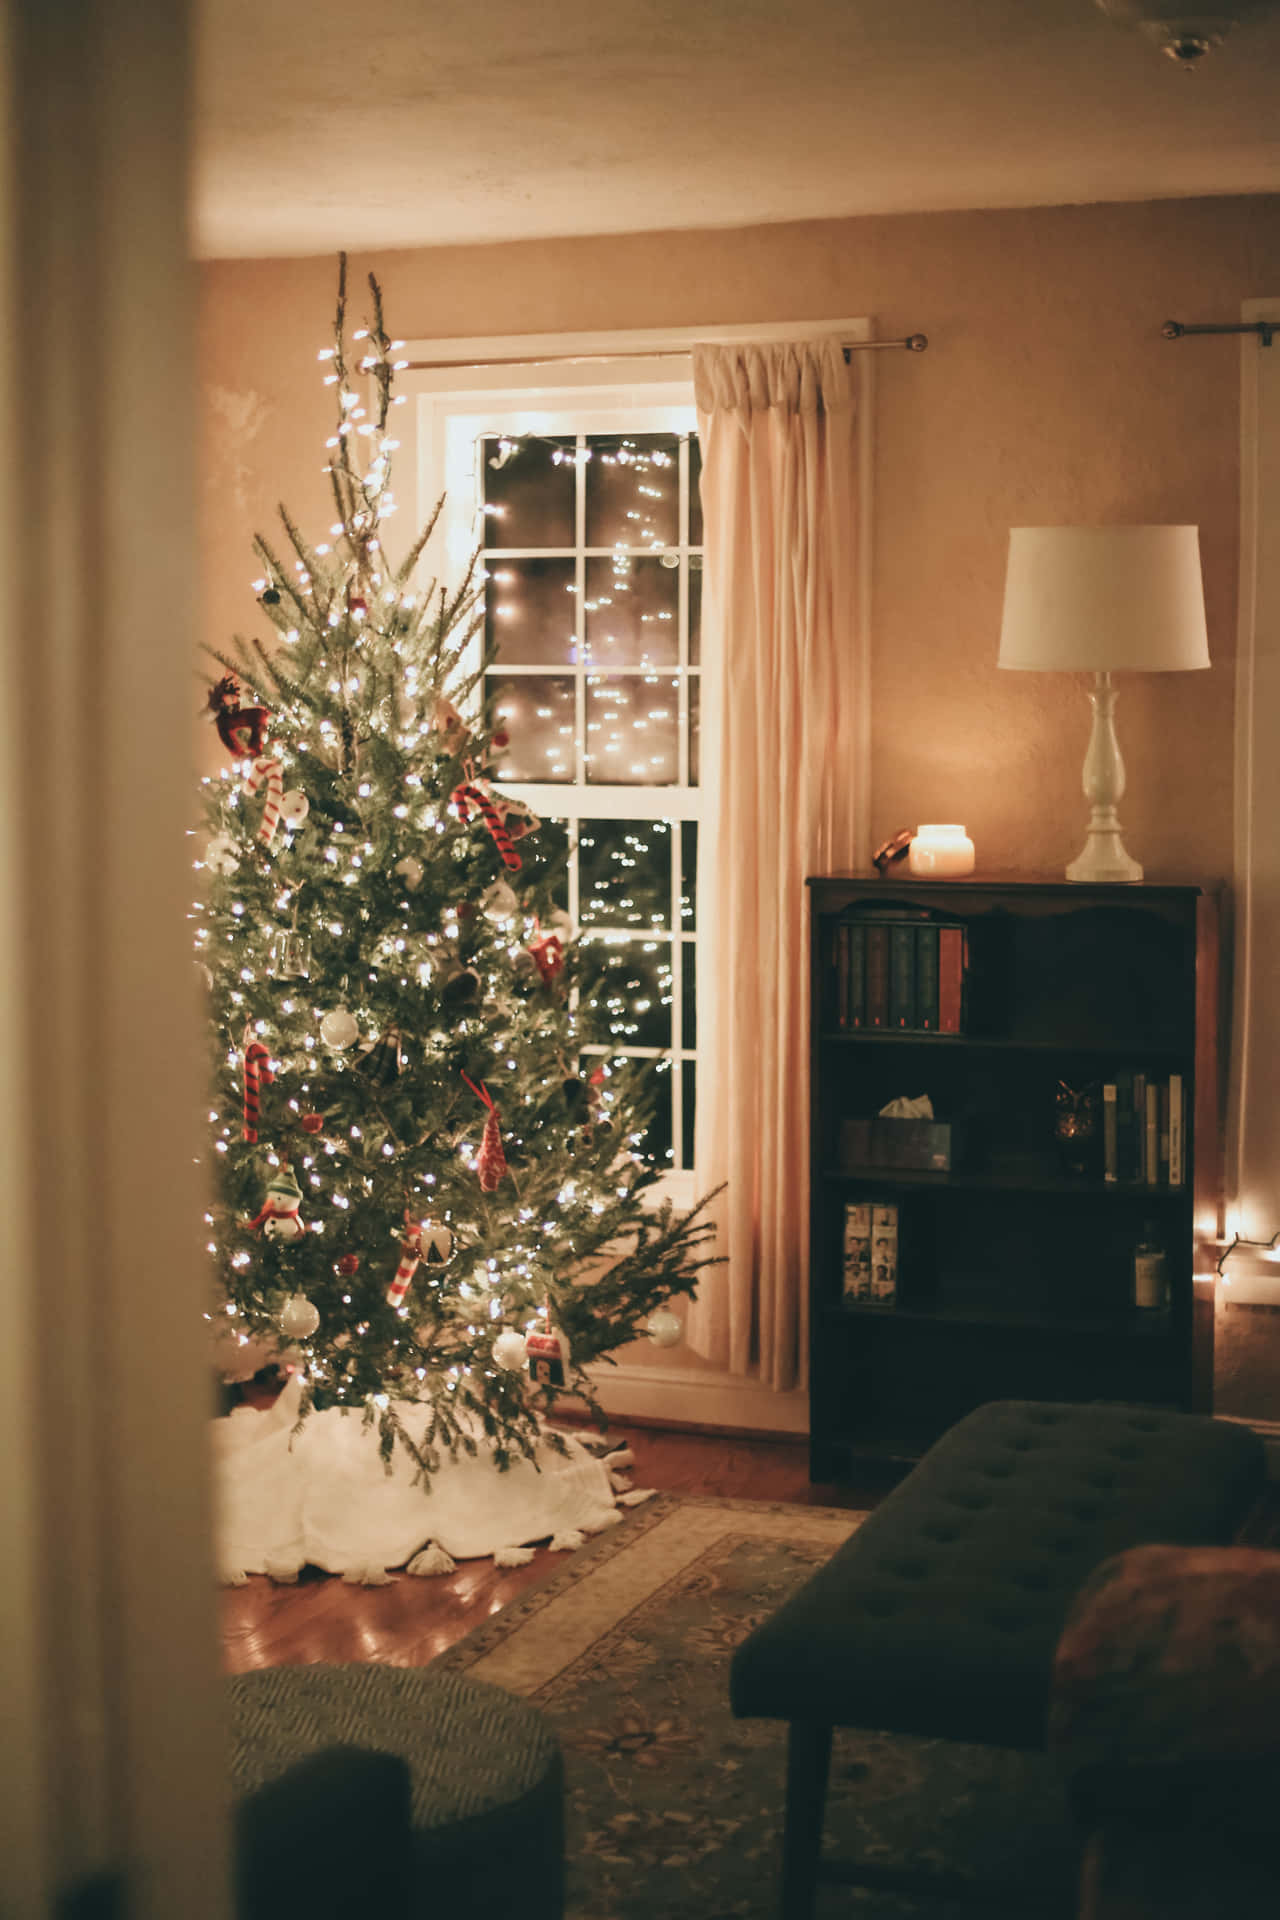 Enjoy festive decorations in this cozy Christmas Living Room